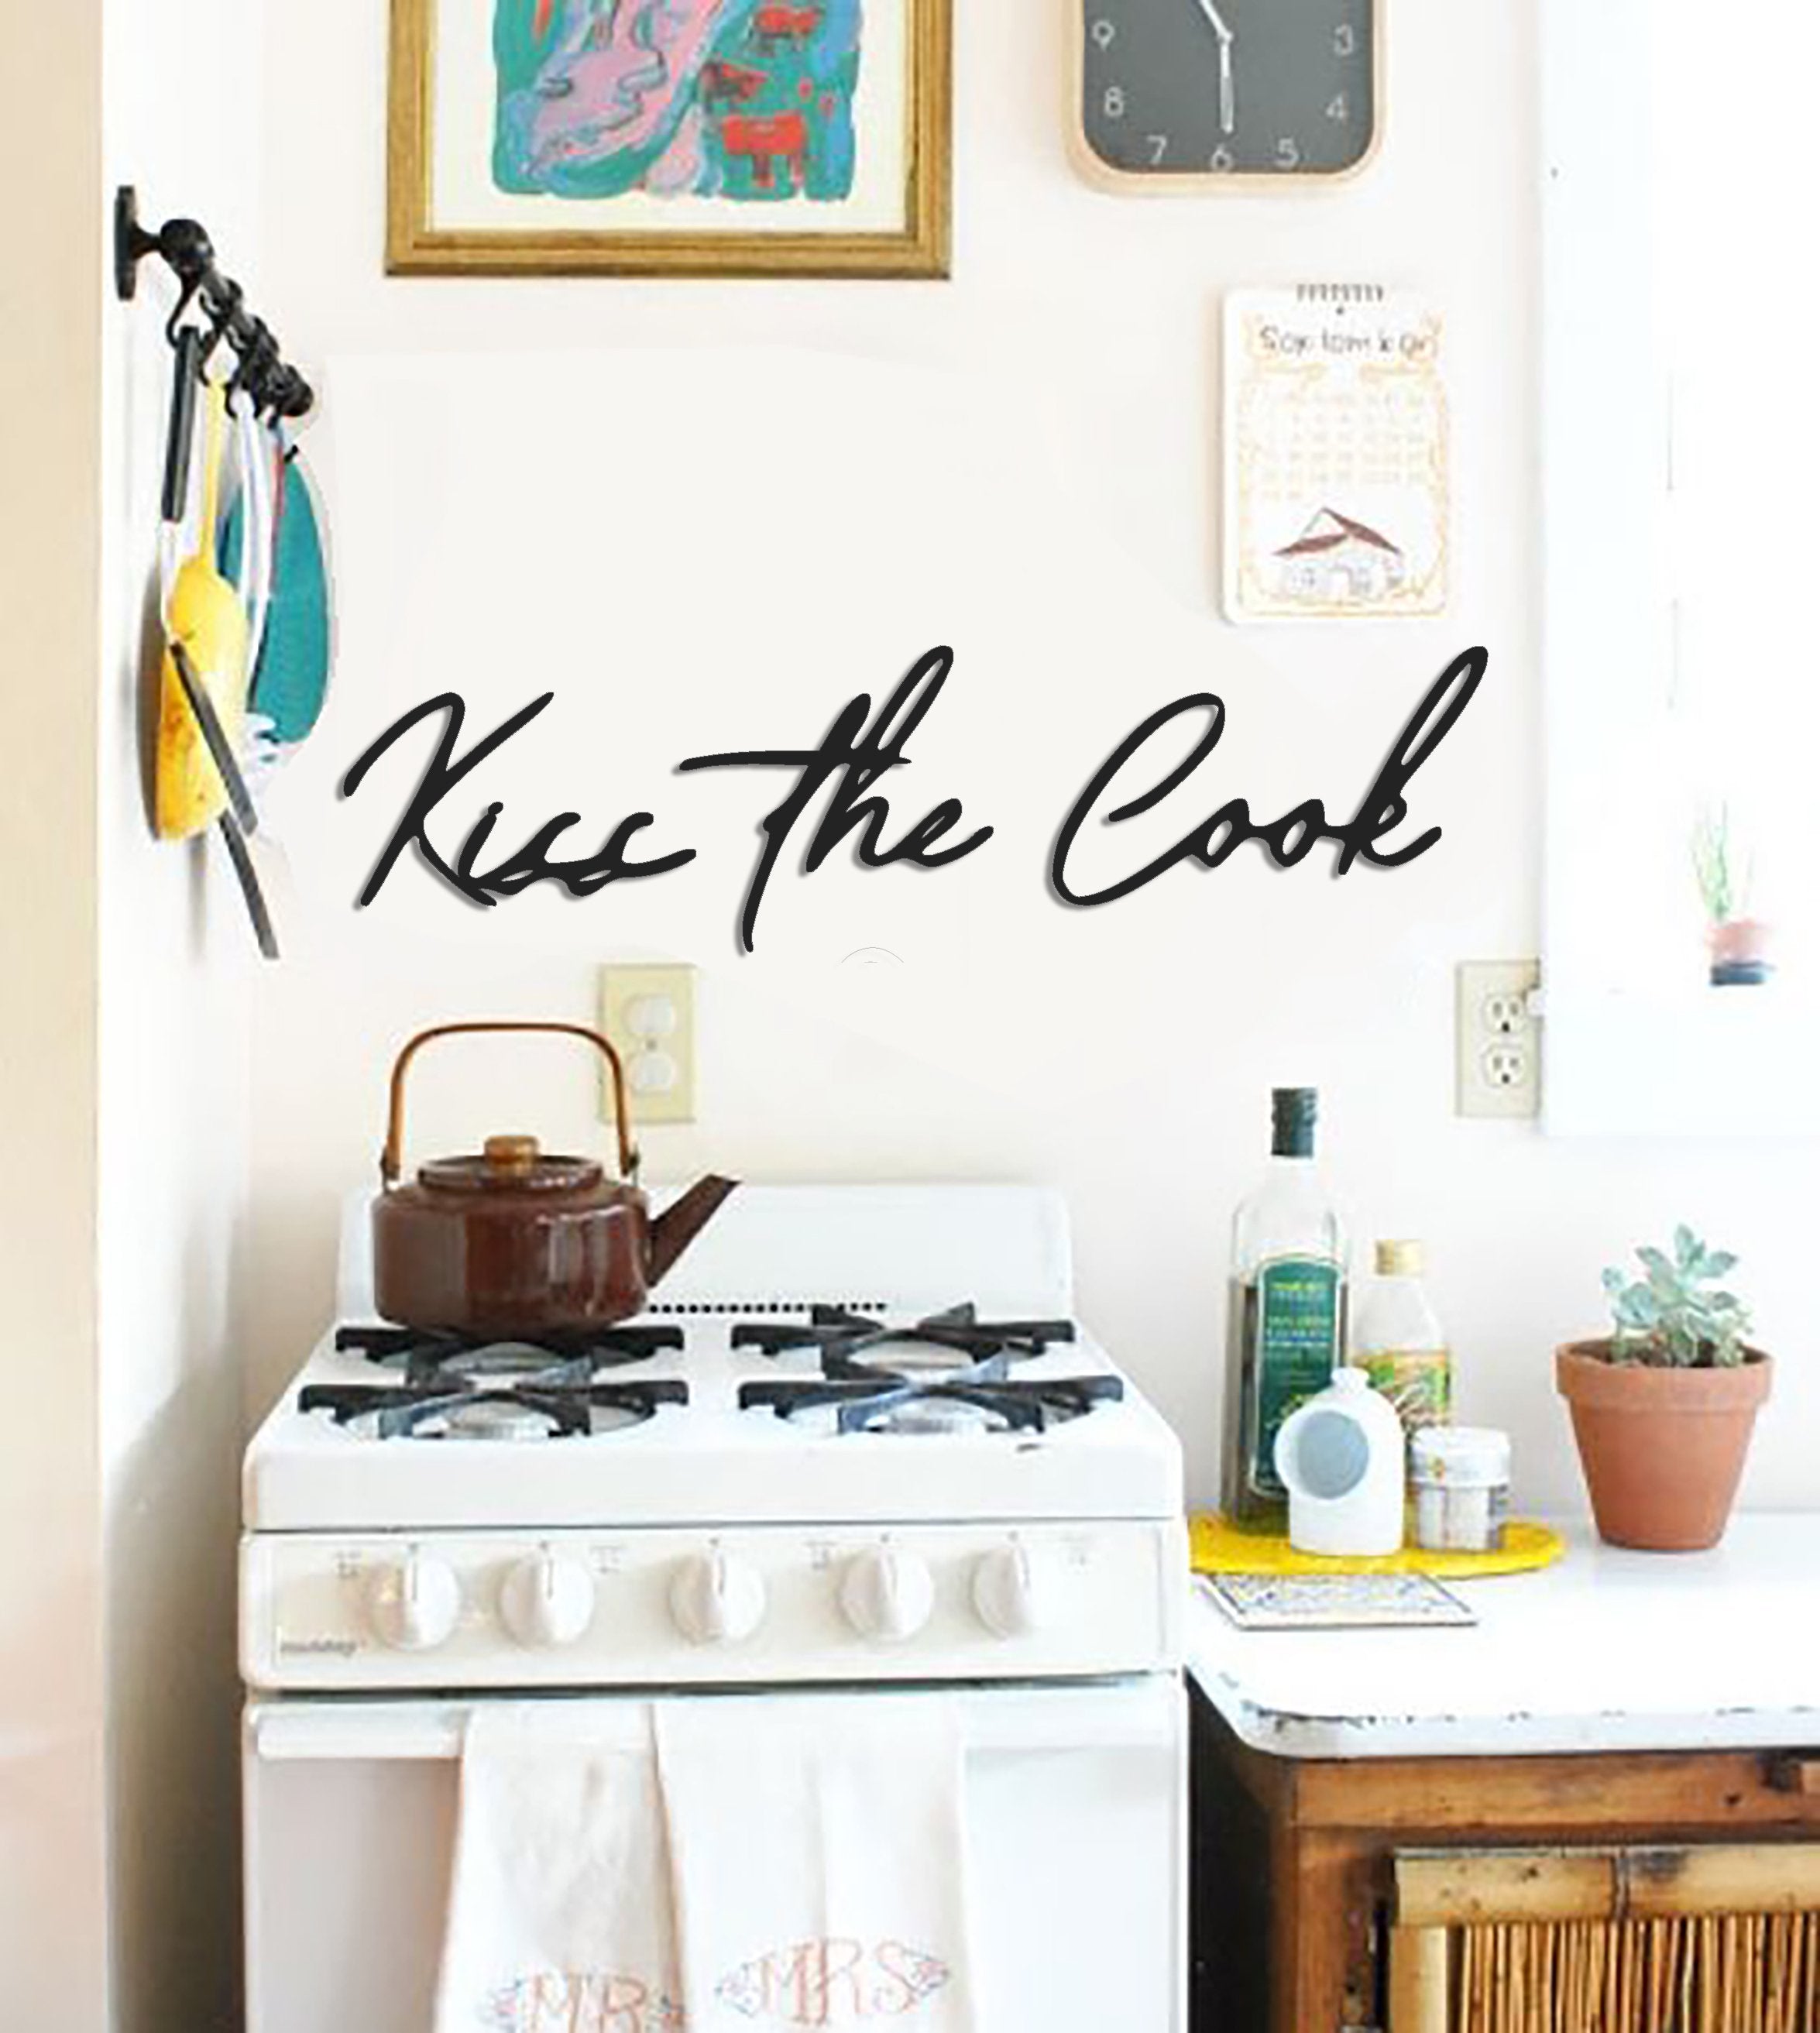 Kiss the Chef Print, Kitchen Wall Art, BBQ Gifts for Men, Choose Your  Colors and Change up the Words, Kitchen Decor, Birthday Gift for Him 